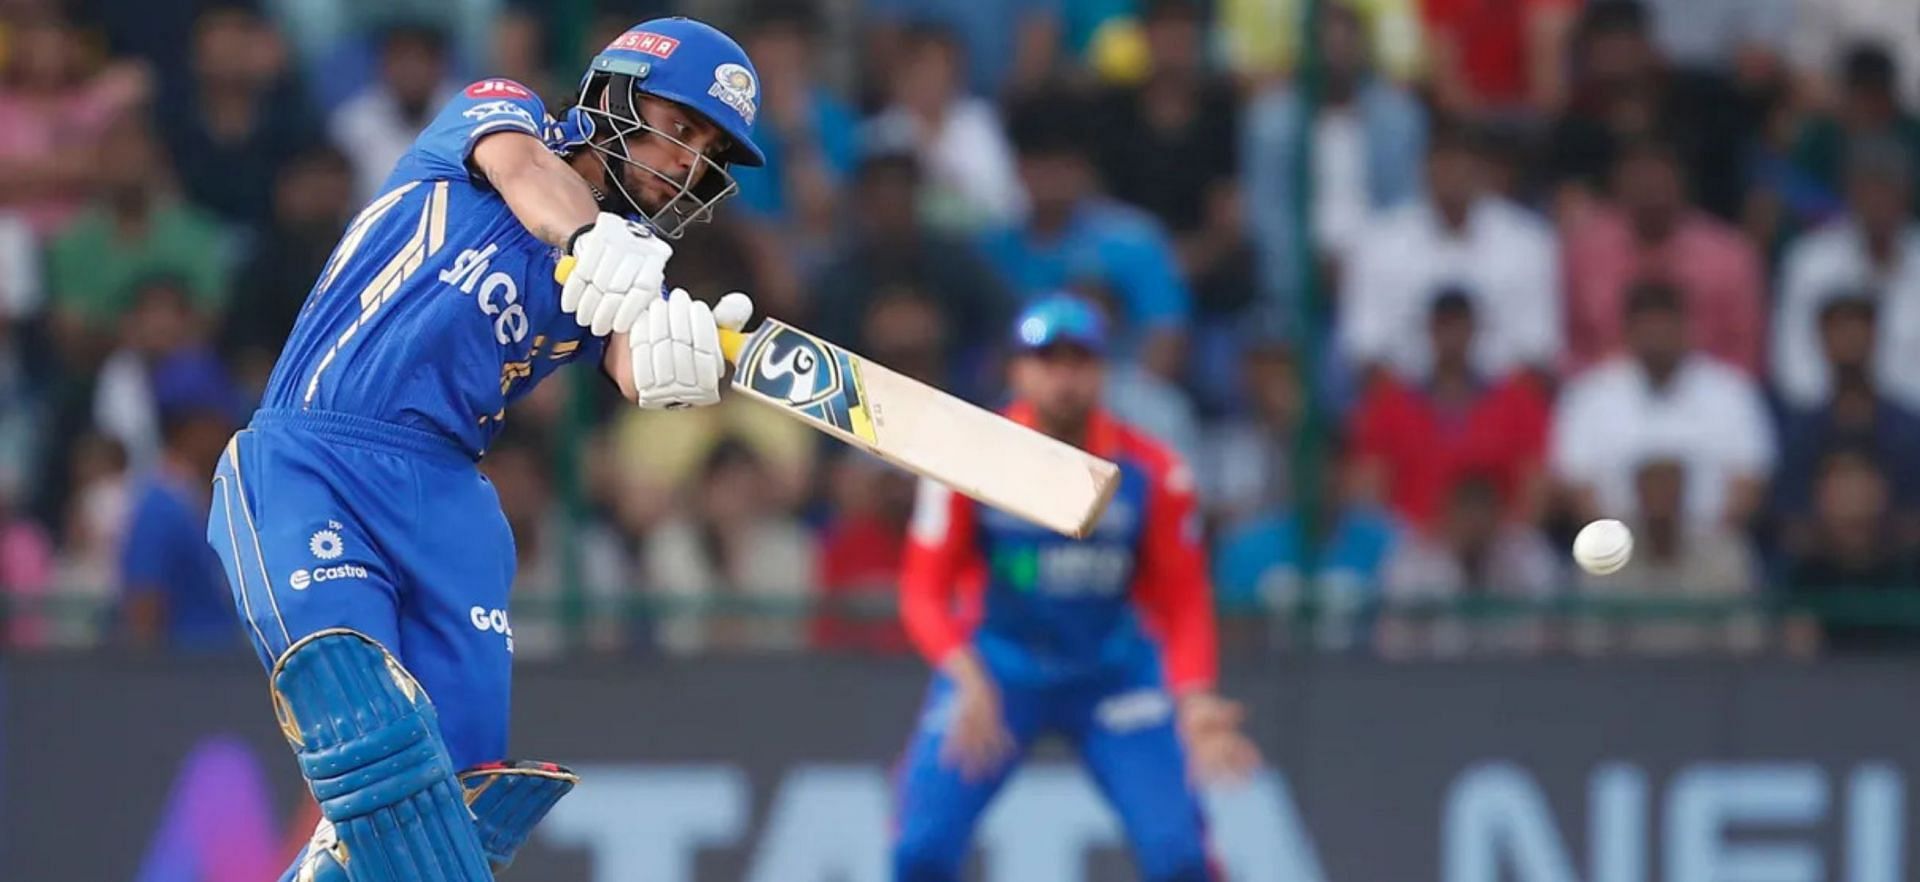 Mumbai Indians wicket-keeper batter Ishan Kishan has been fined 10 per cent of his match fees for breaching the IPL code of conduct during the 2024 IPL game against the Delhi Capitals